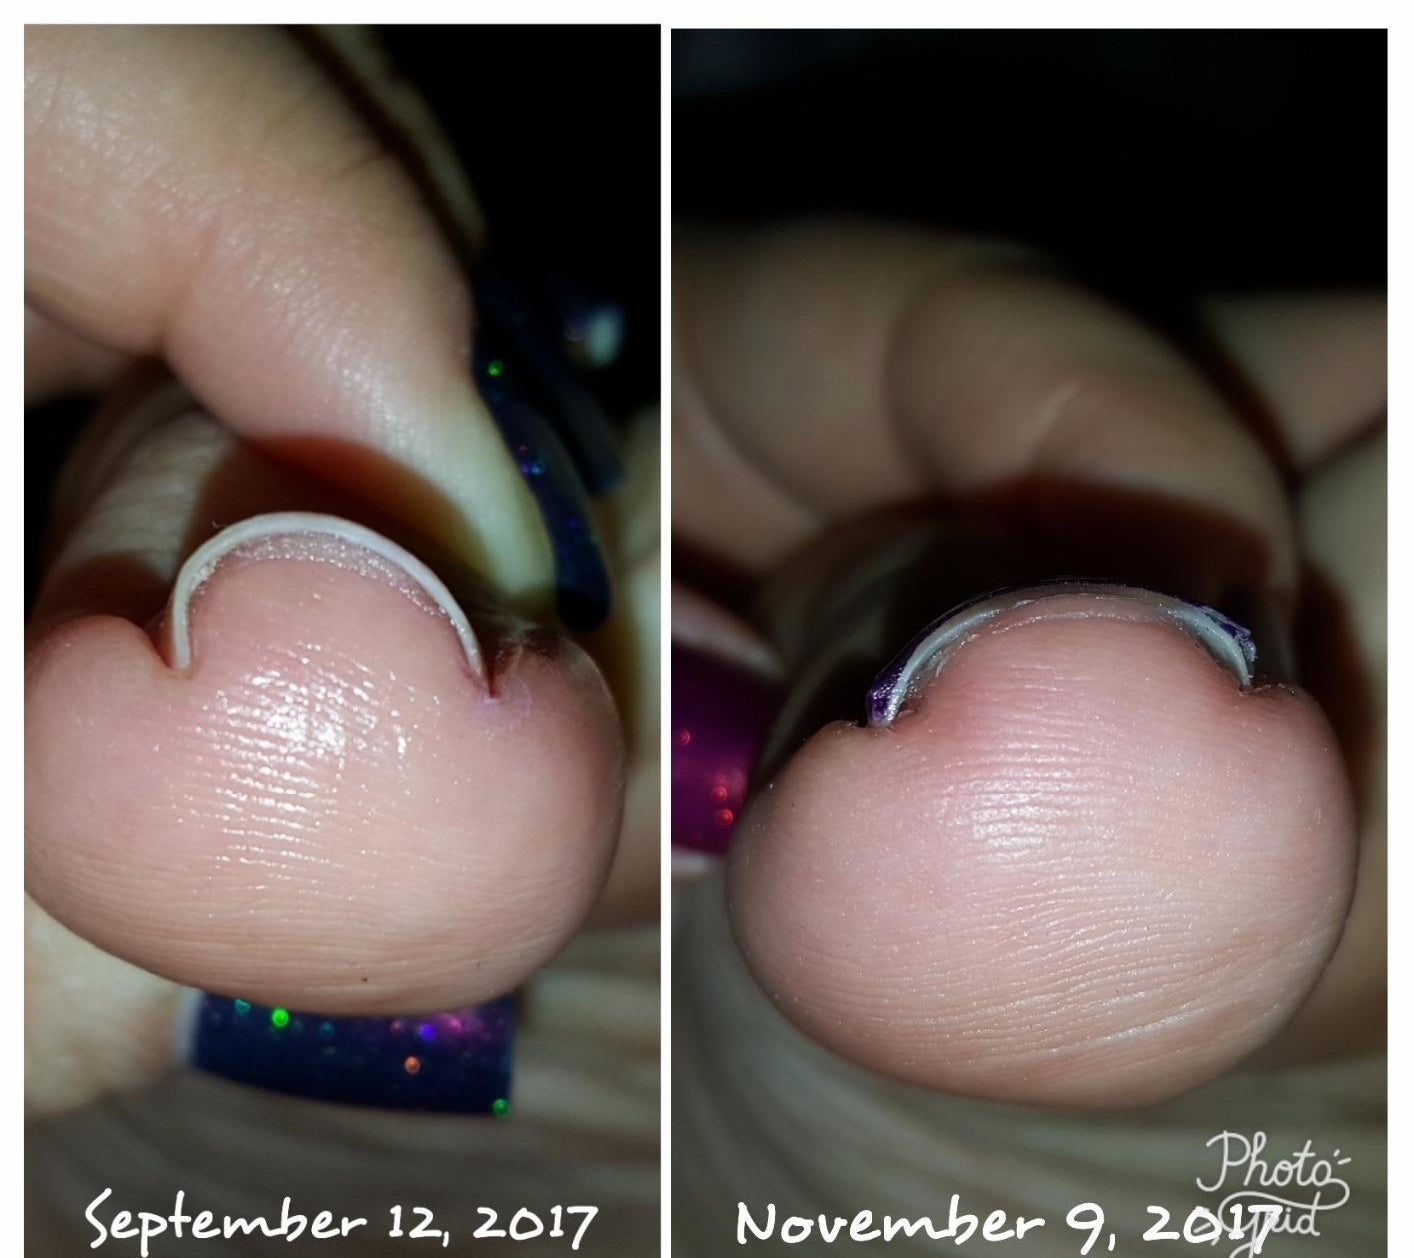 a review image of a bent nail that says september 12 2017 next to another picture of the nail looking much flatter that says november 9 2017